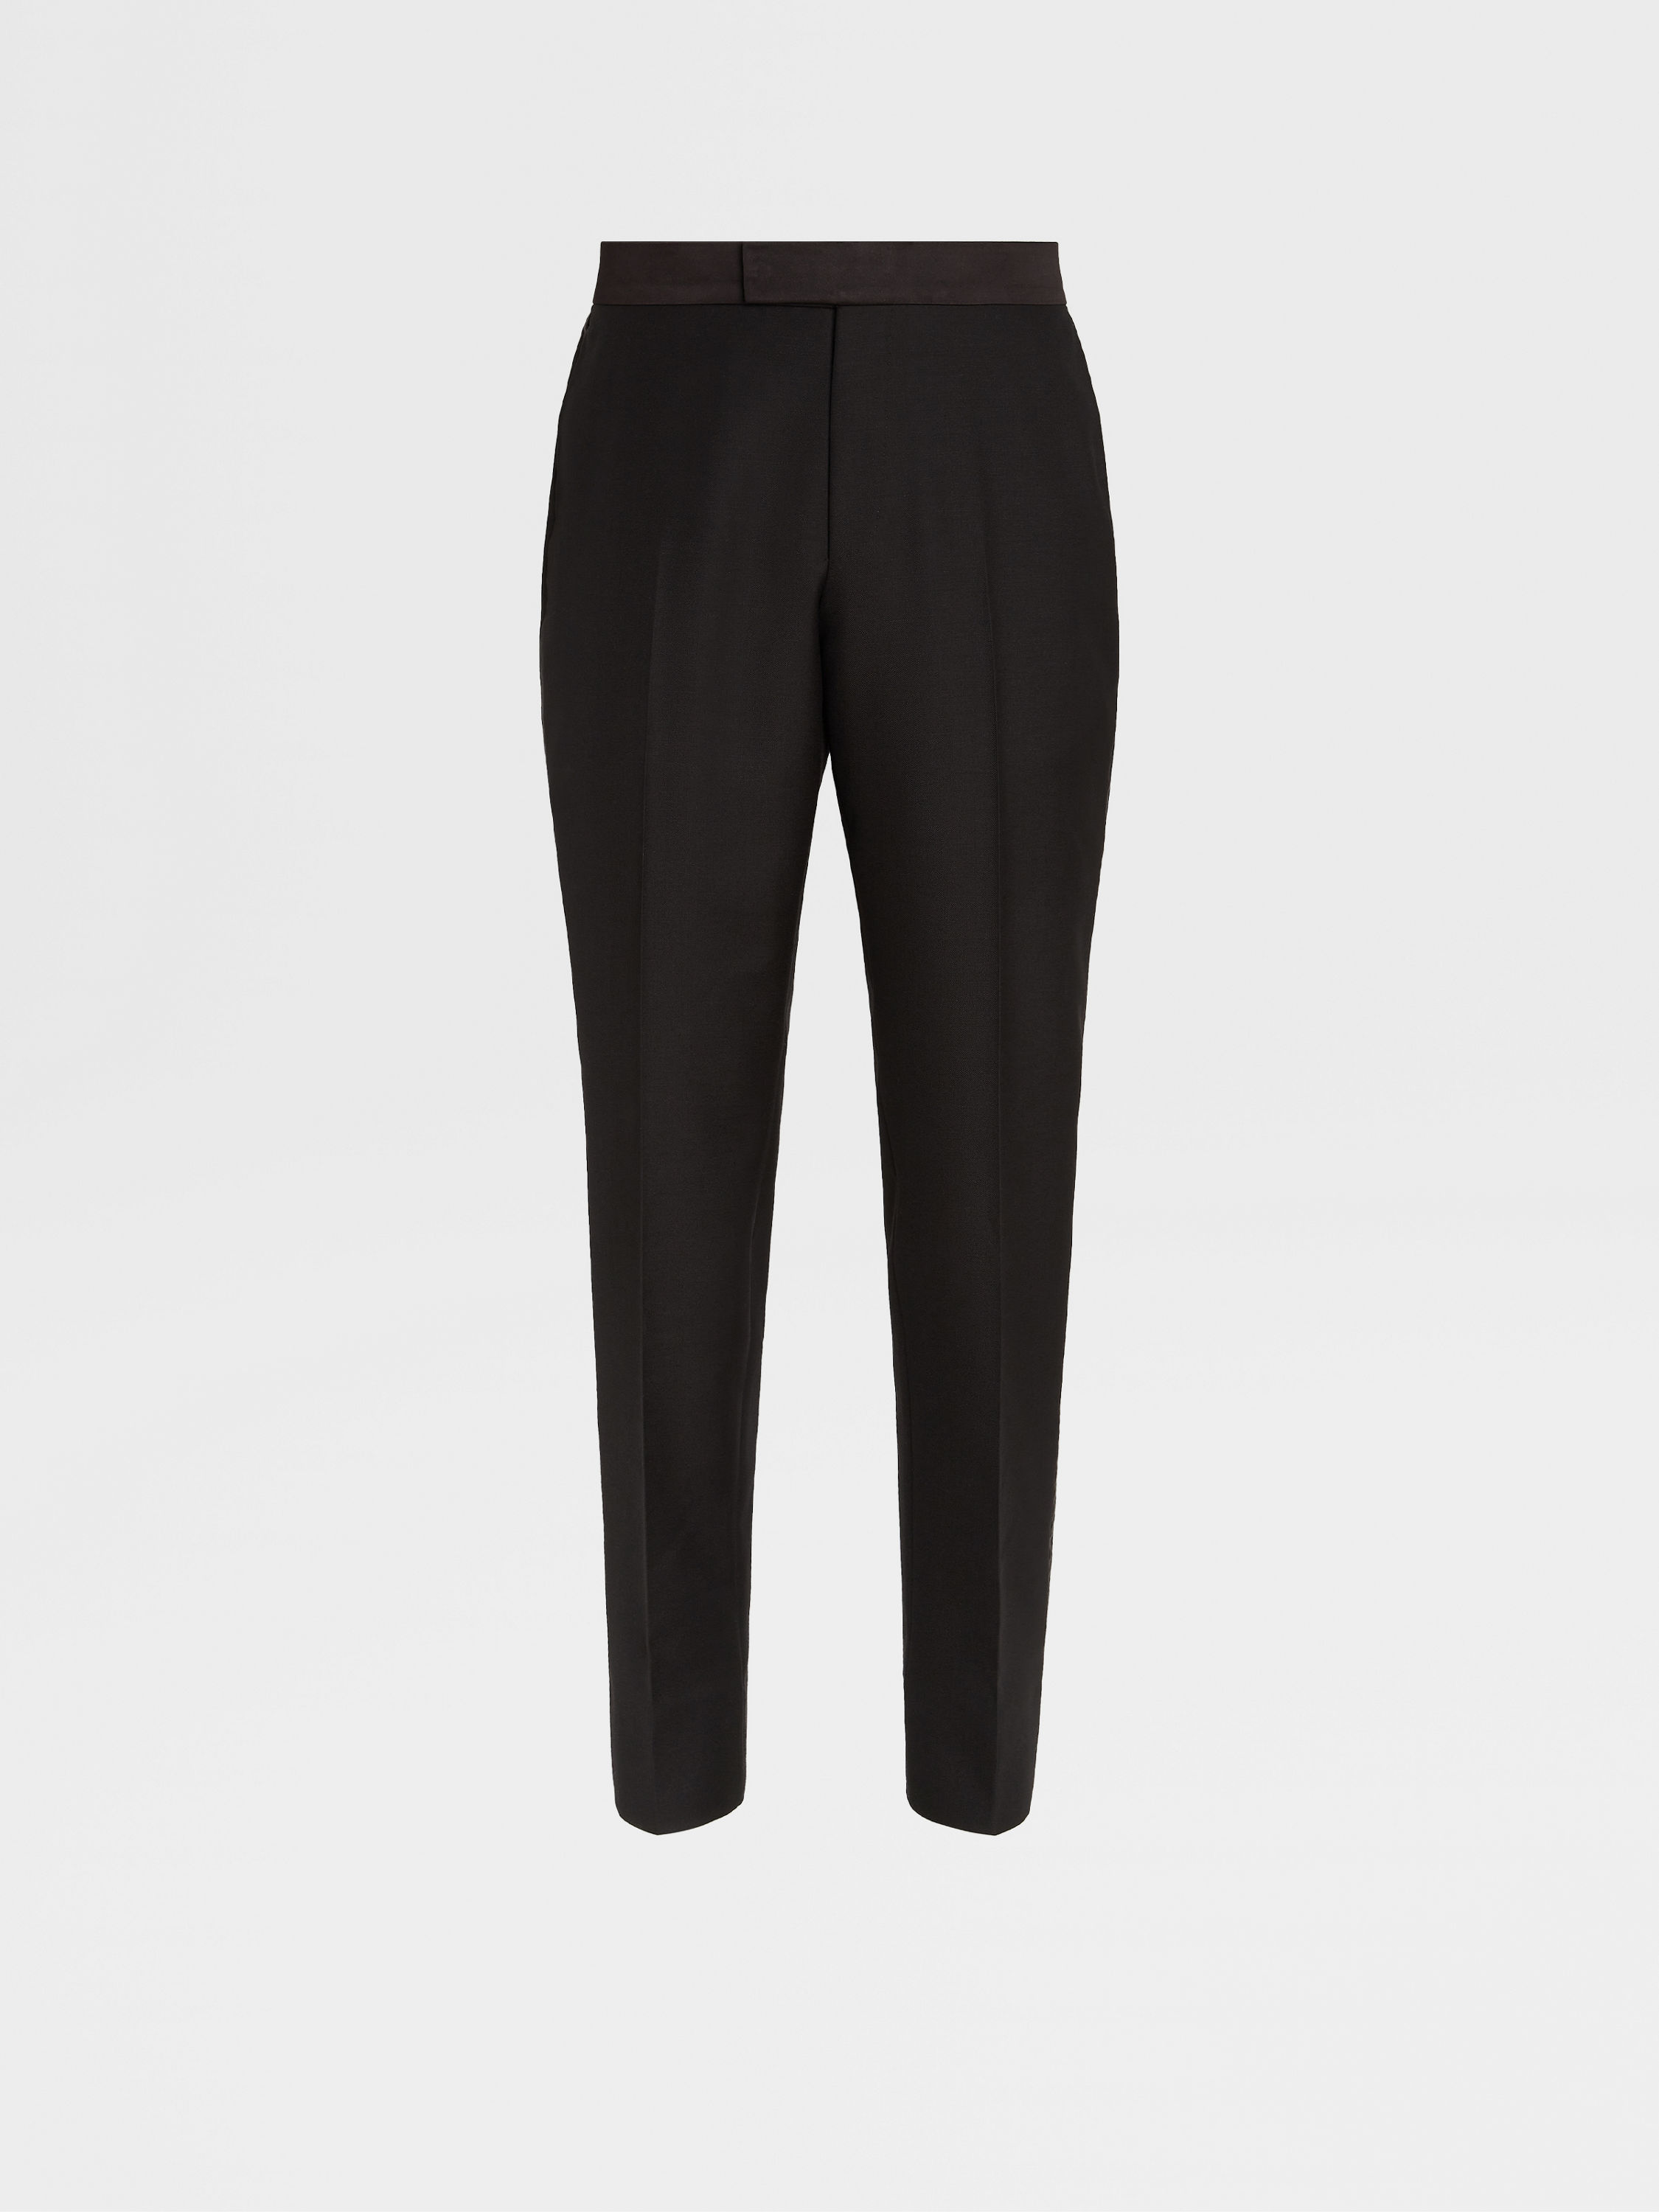 Black Wool and Mohair Evening Pants